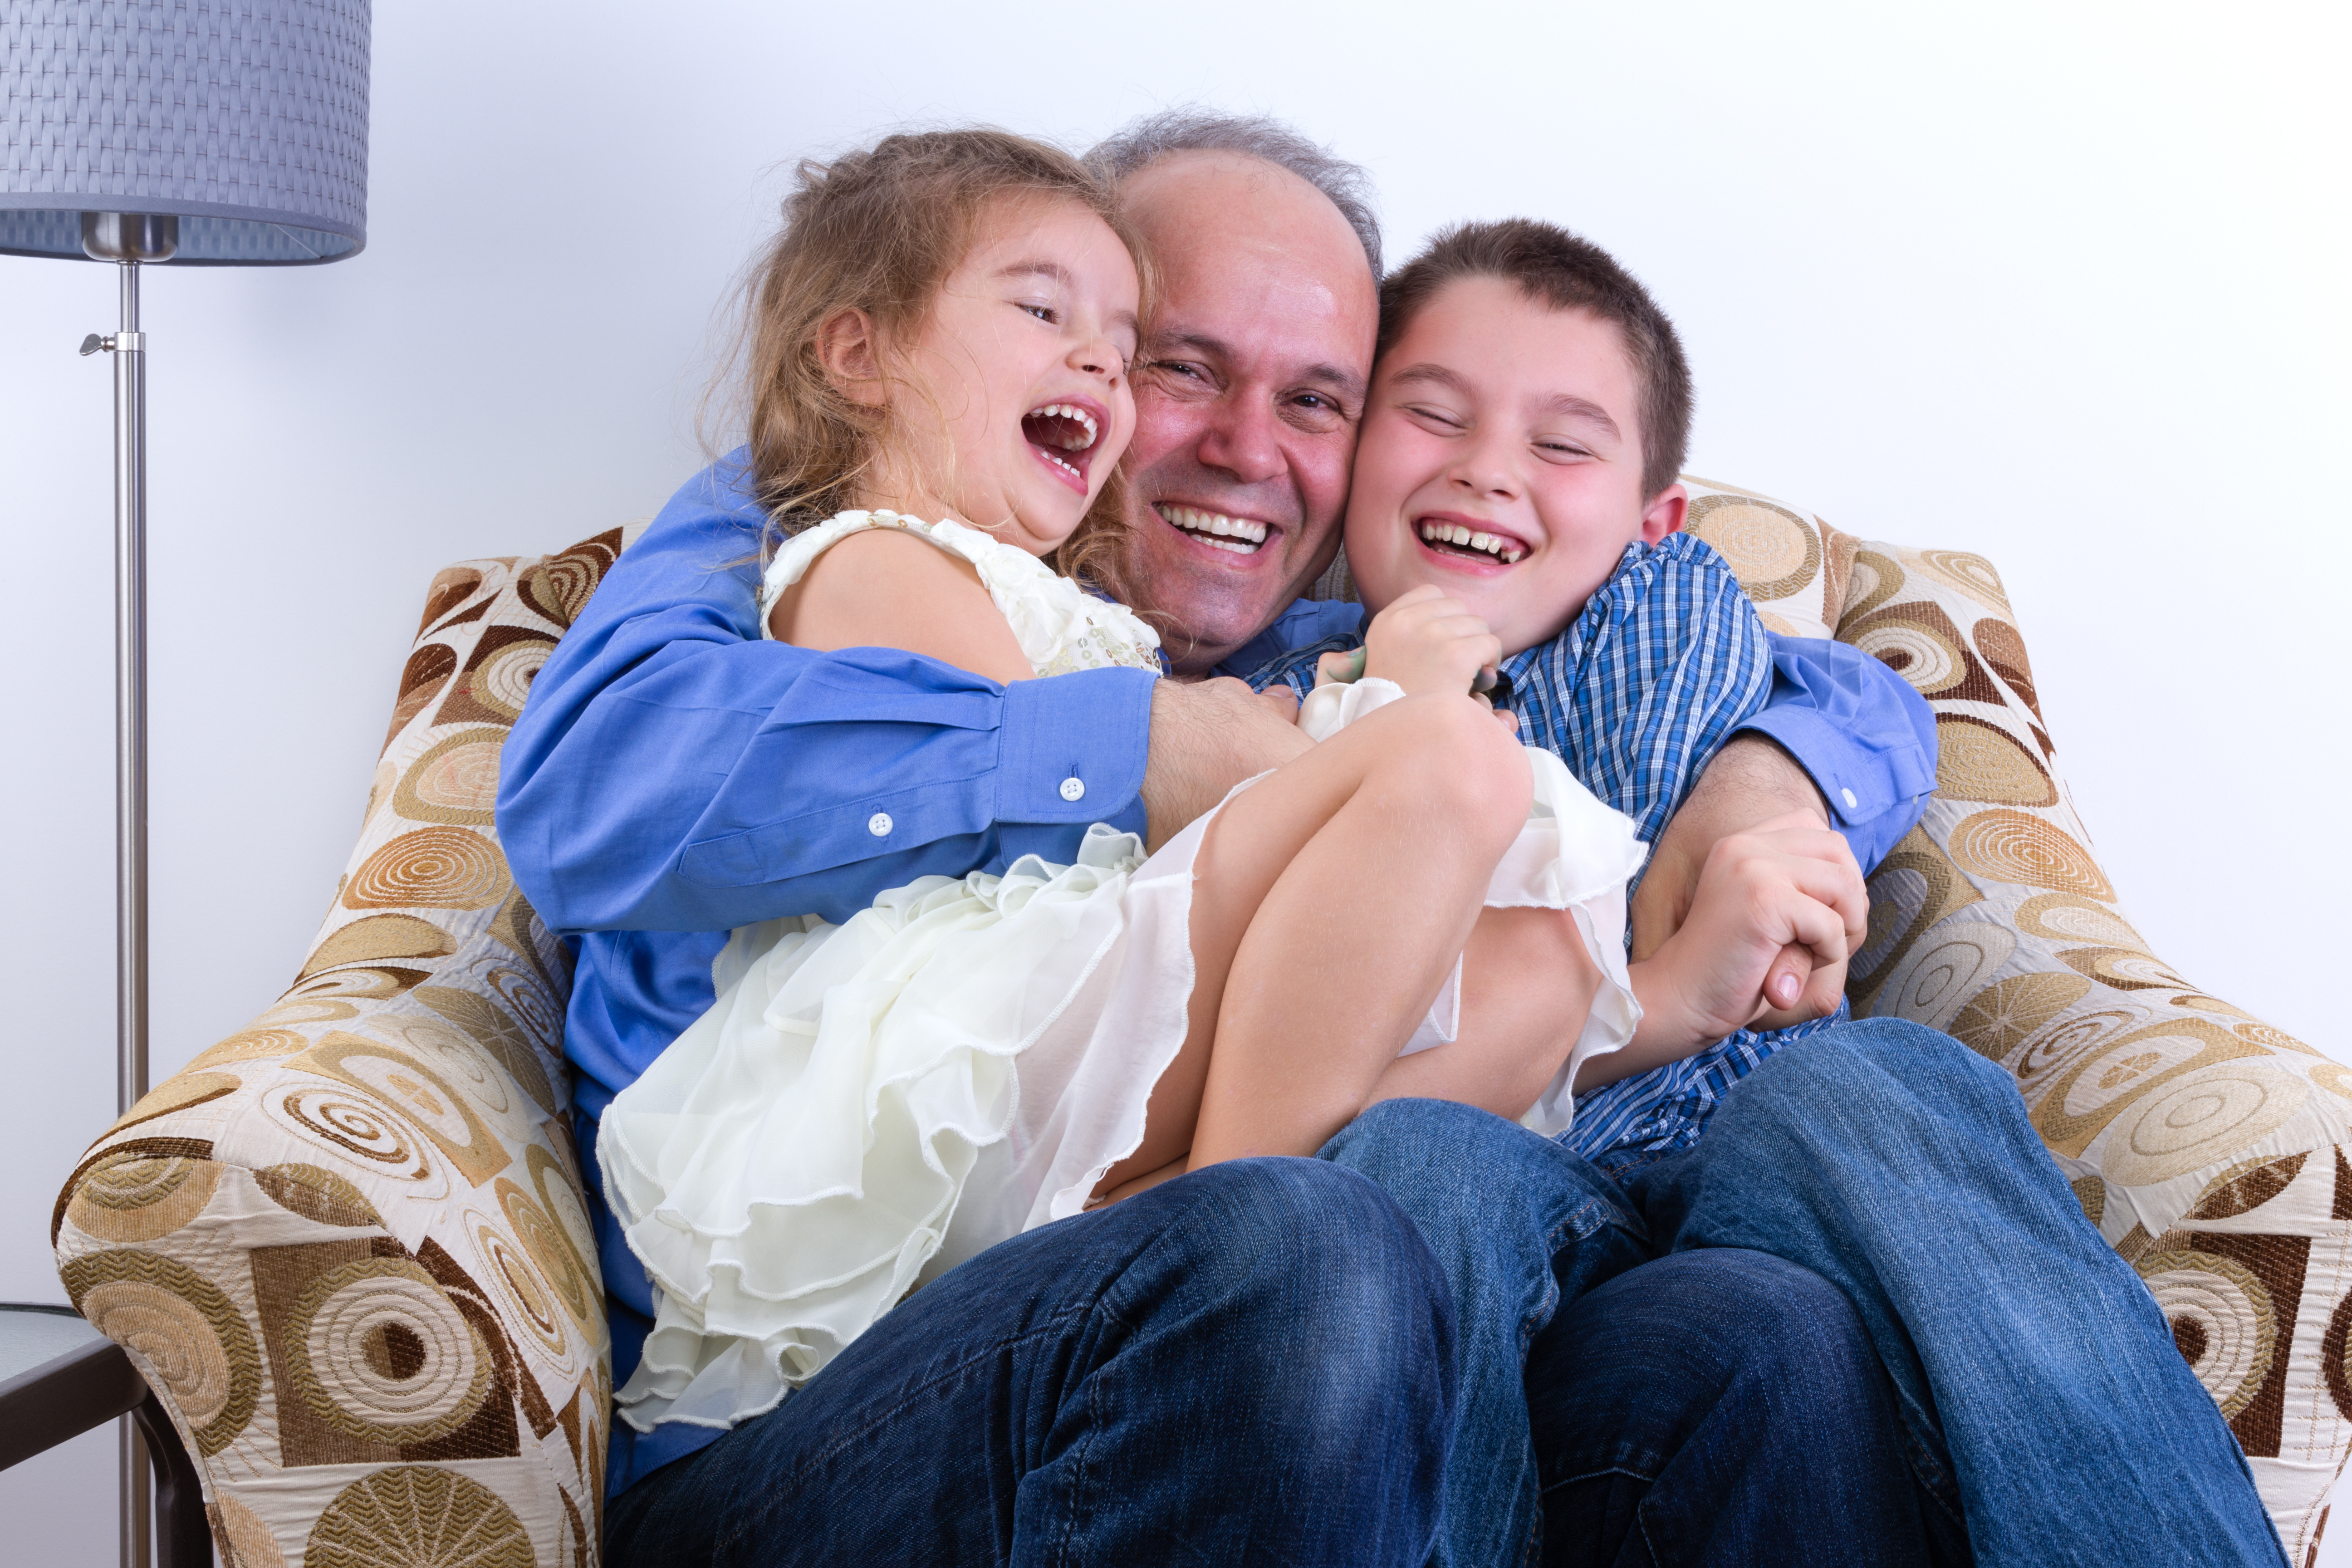 Middle-aged single father with two laughing young kids, a girl and boy, on his lap sitting in an armchair enjoying a moment of fun and hilarity as a family